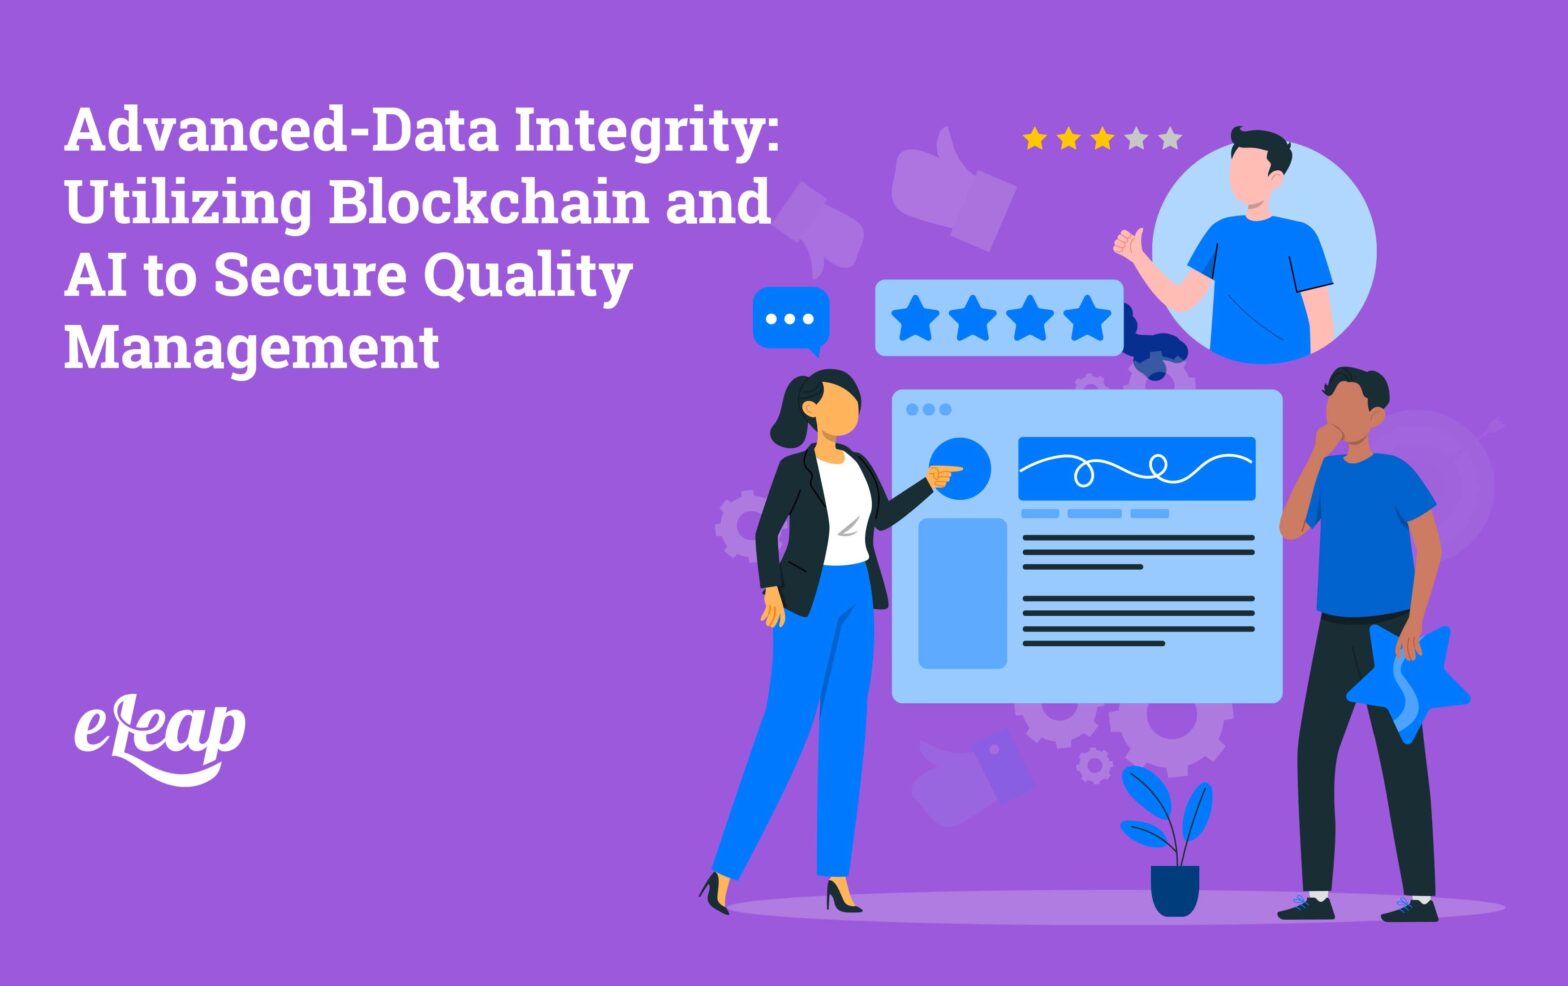 Advanced-Data Integrity: Utilizing Blockchain and AI to Secure Quality Management